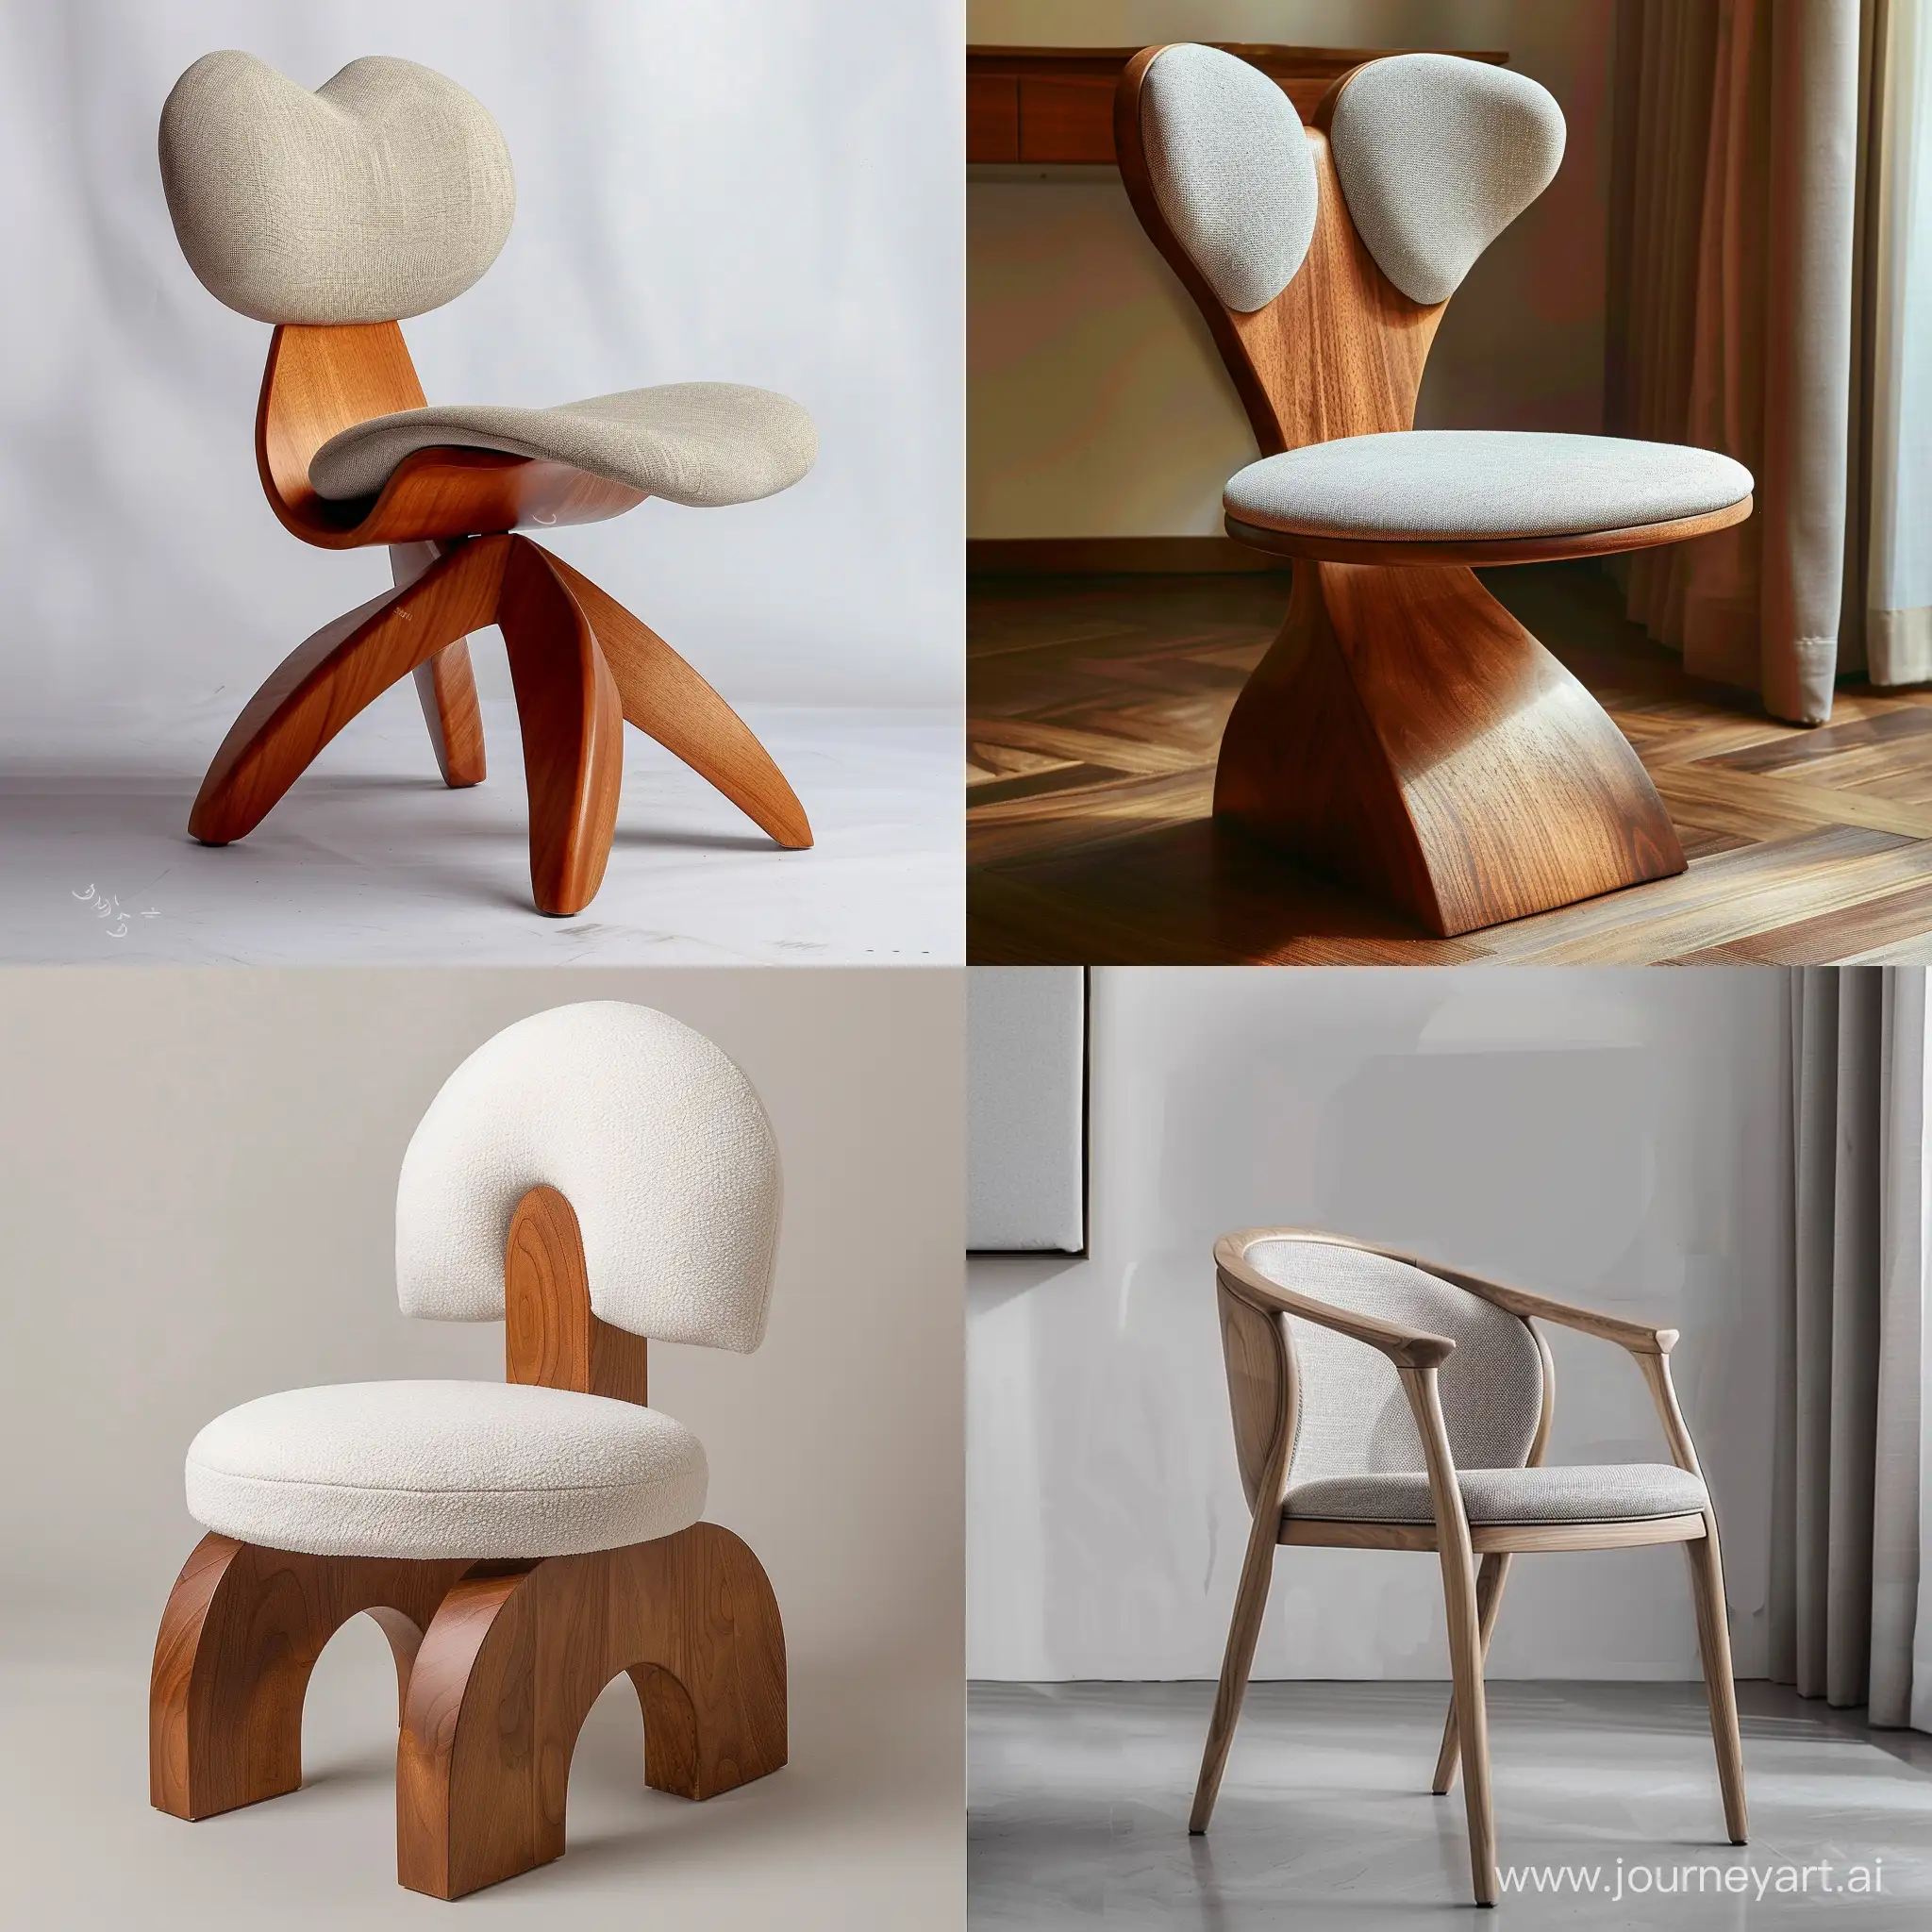 Enter a description of the picture you want to generate. For example: interesting chair in the style of shape of the hieroglyph comfortable,concise,tactile,modern, wood, solid, soft fabric seat elements